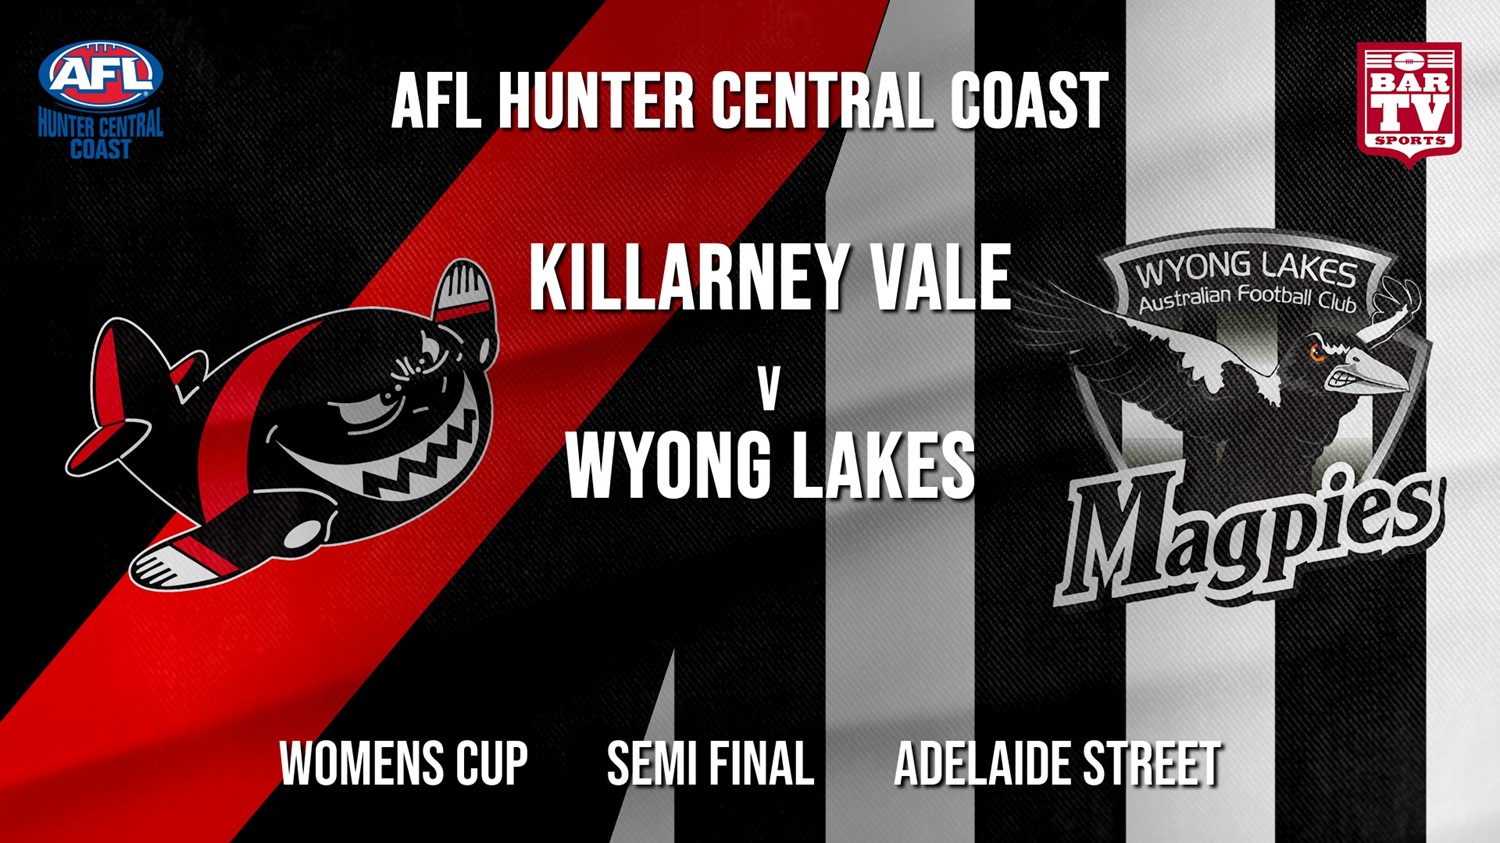 AFL HCC Semi Final - Womens Cup - Killarney Vale Bombers v Wyong Lakes Magpies Minigame Slate Image